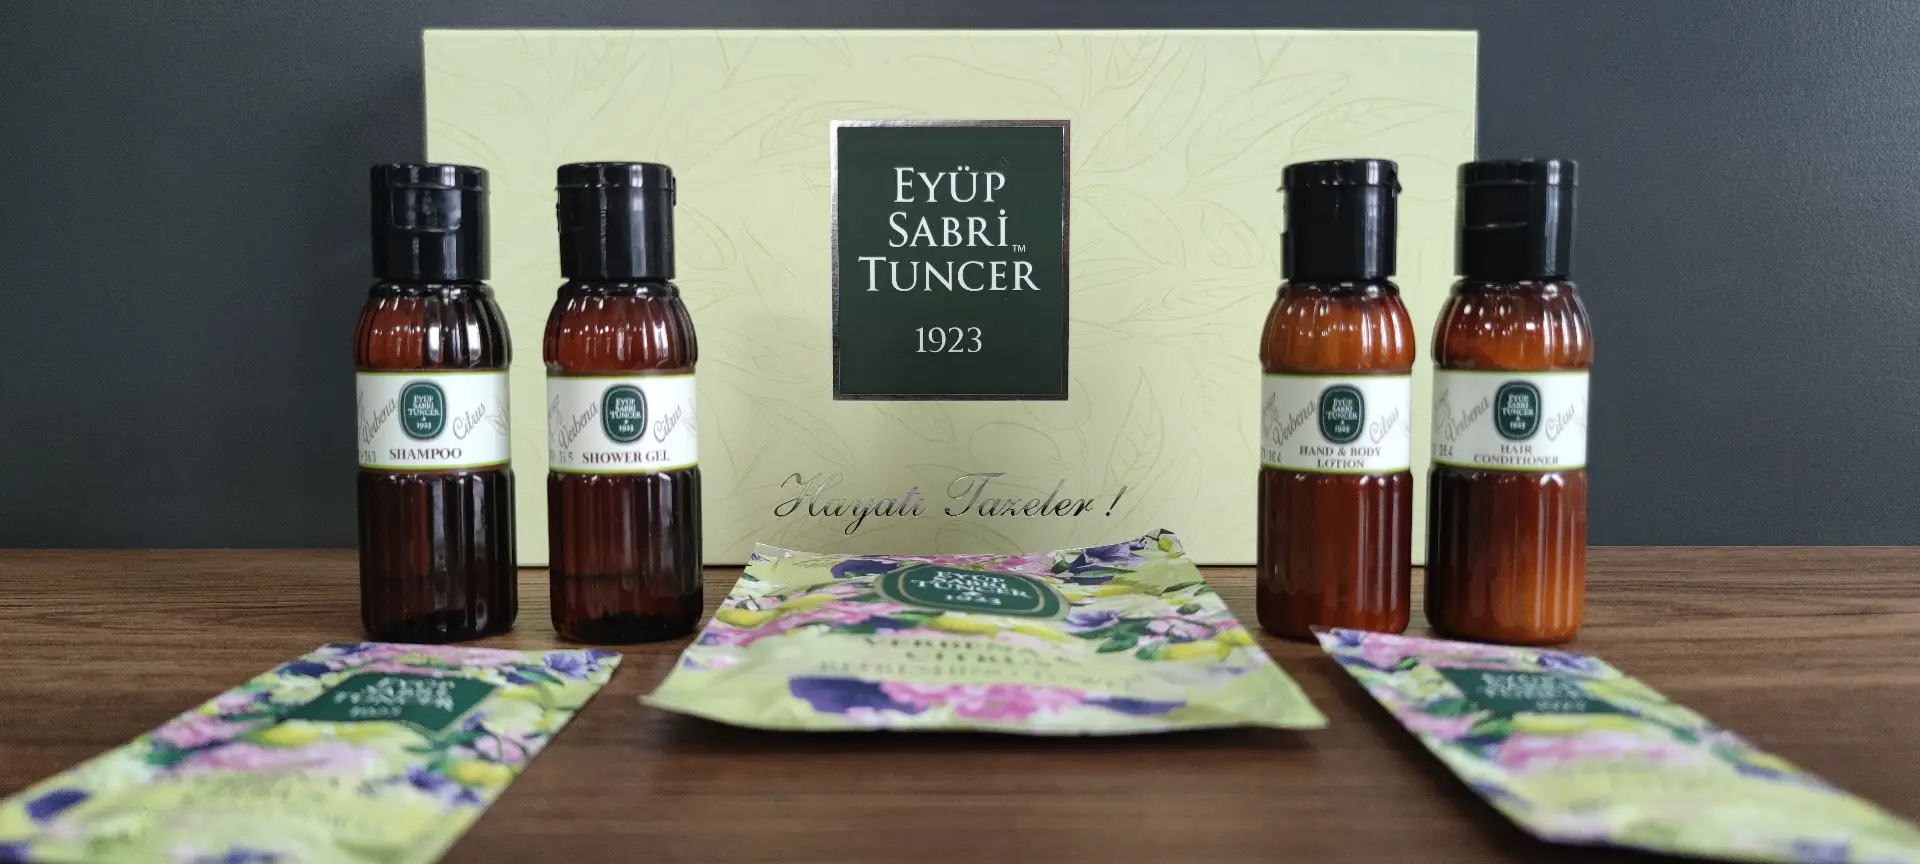 Our 100% local brand, Eyüp Sabri Tuncer! We are here with the hotel series...